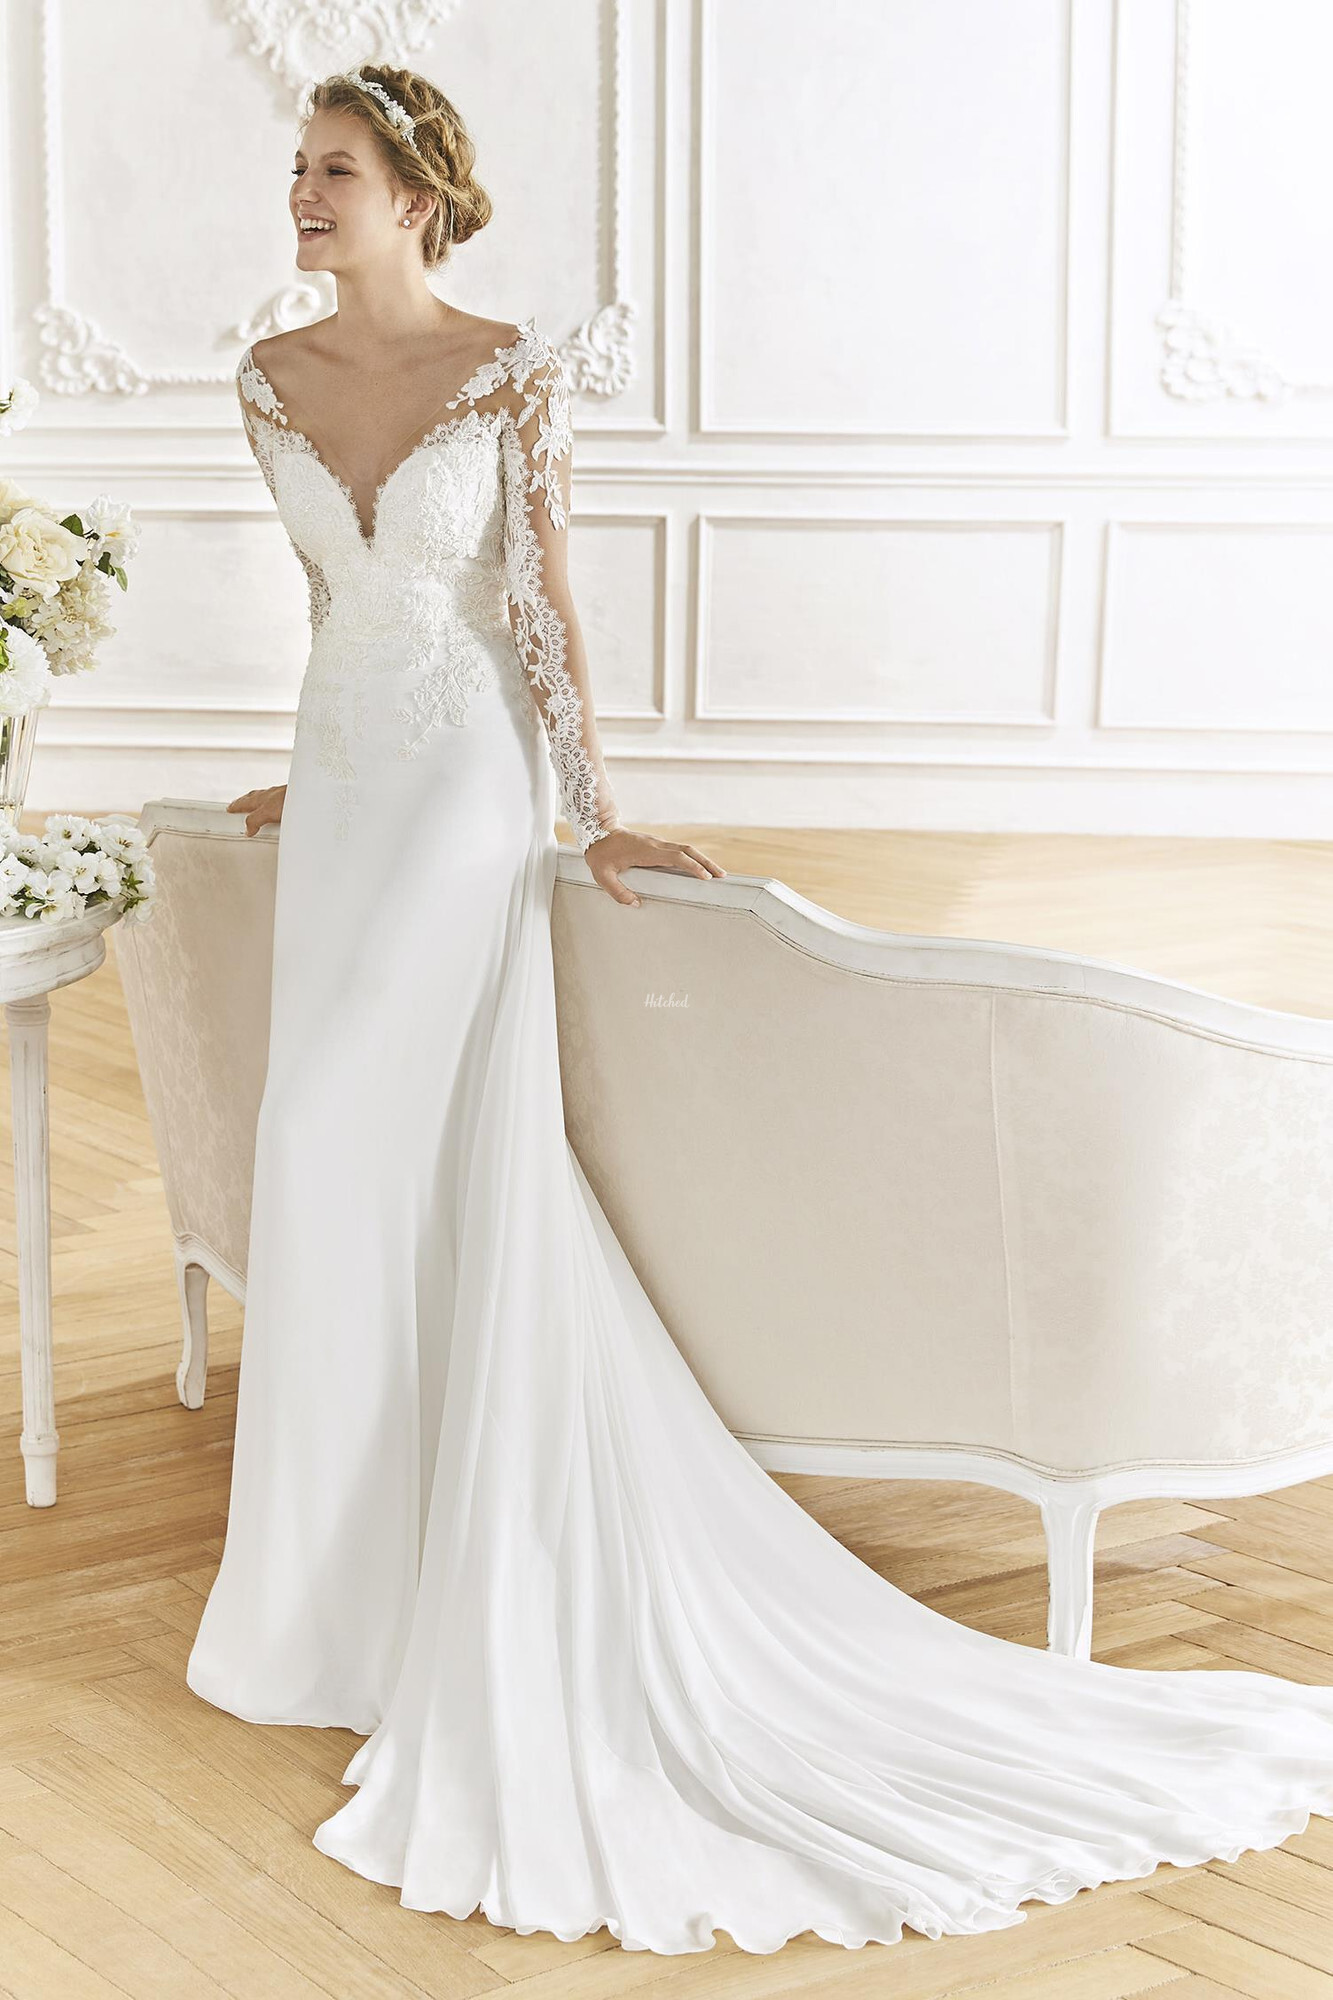 Balmoral Wedding Dress from La Sposa - hitched.co.uk